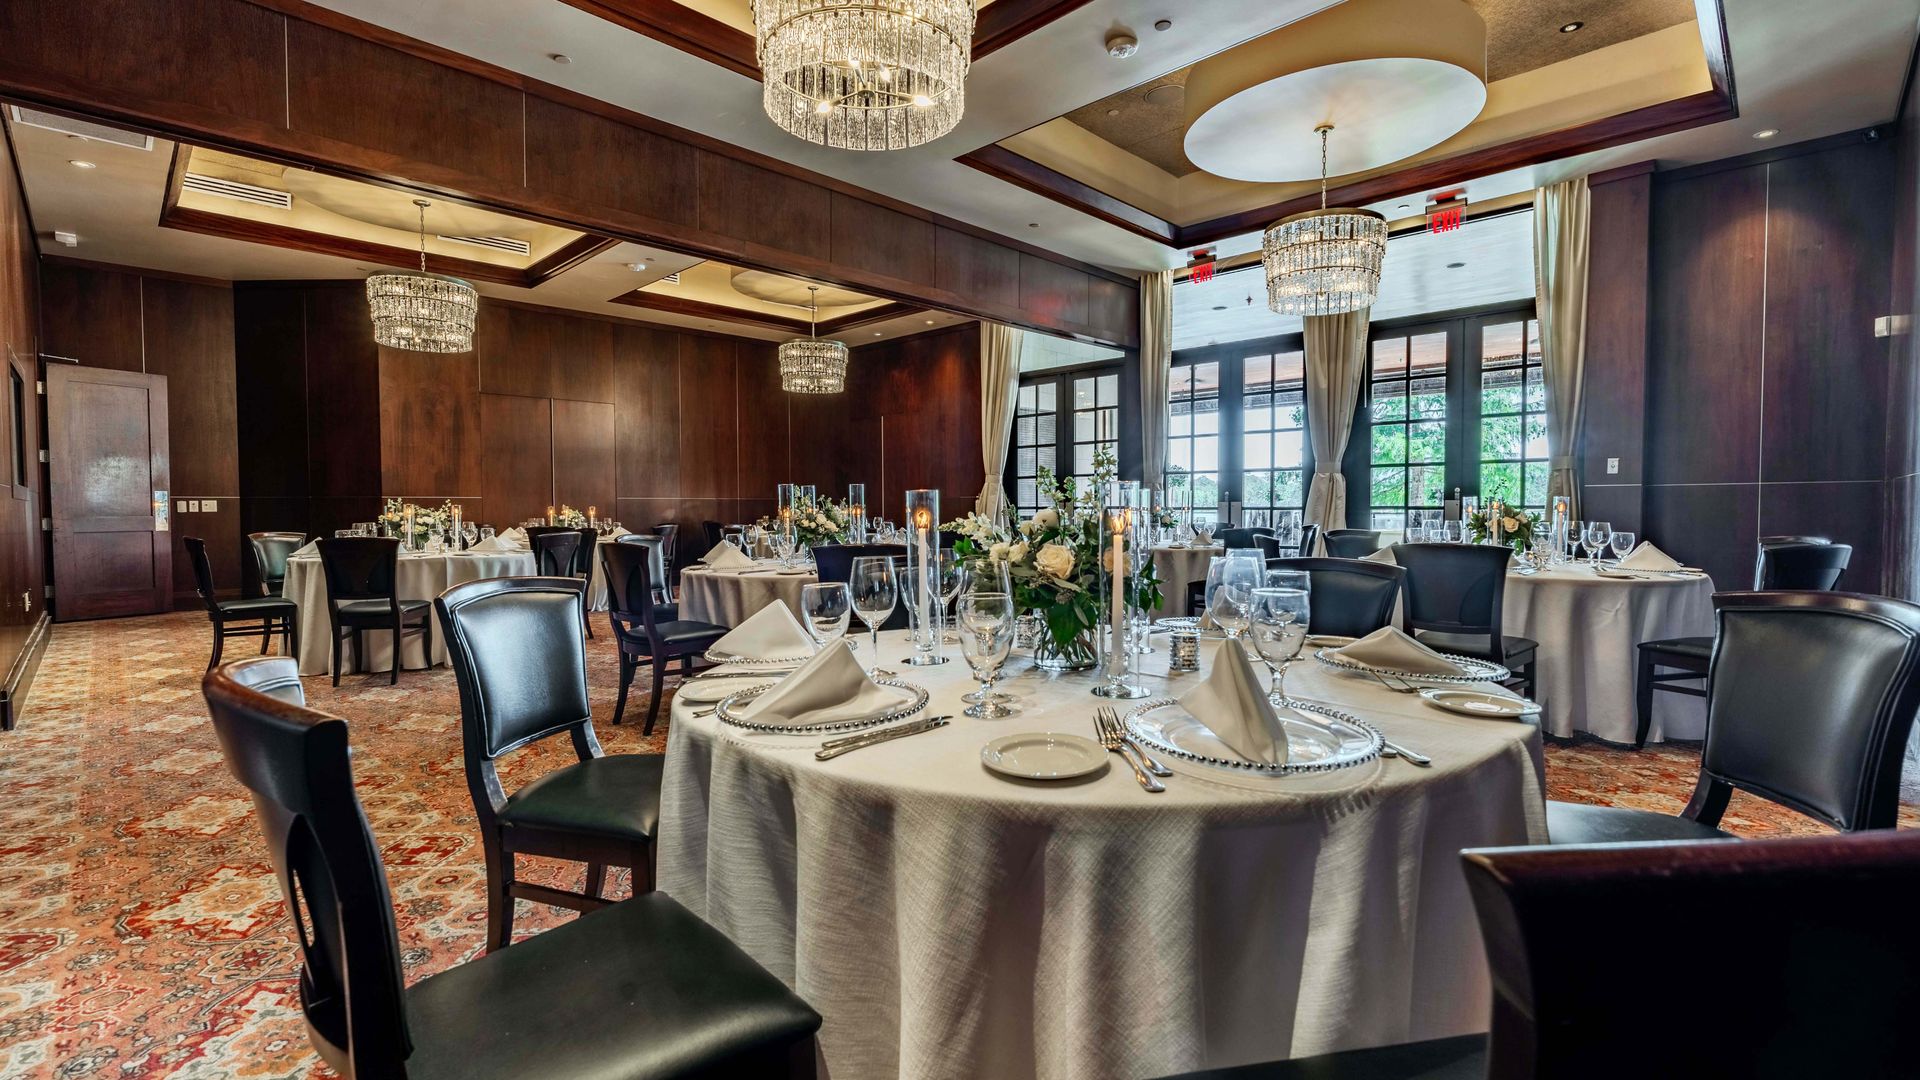 The Stone Crab Room at the Woodlands location. Corner viewpoint of round tables dressed in white linen, china, glass and silver with large glass French doors overlooking the terrace.